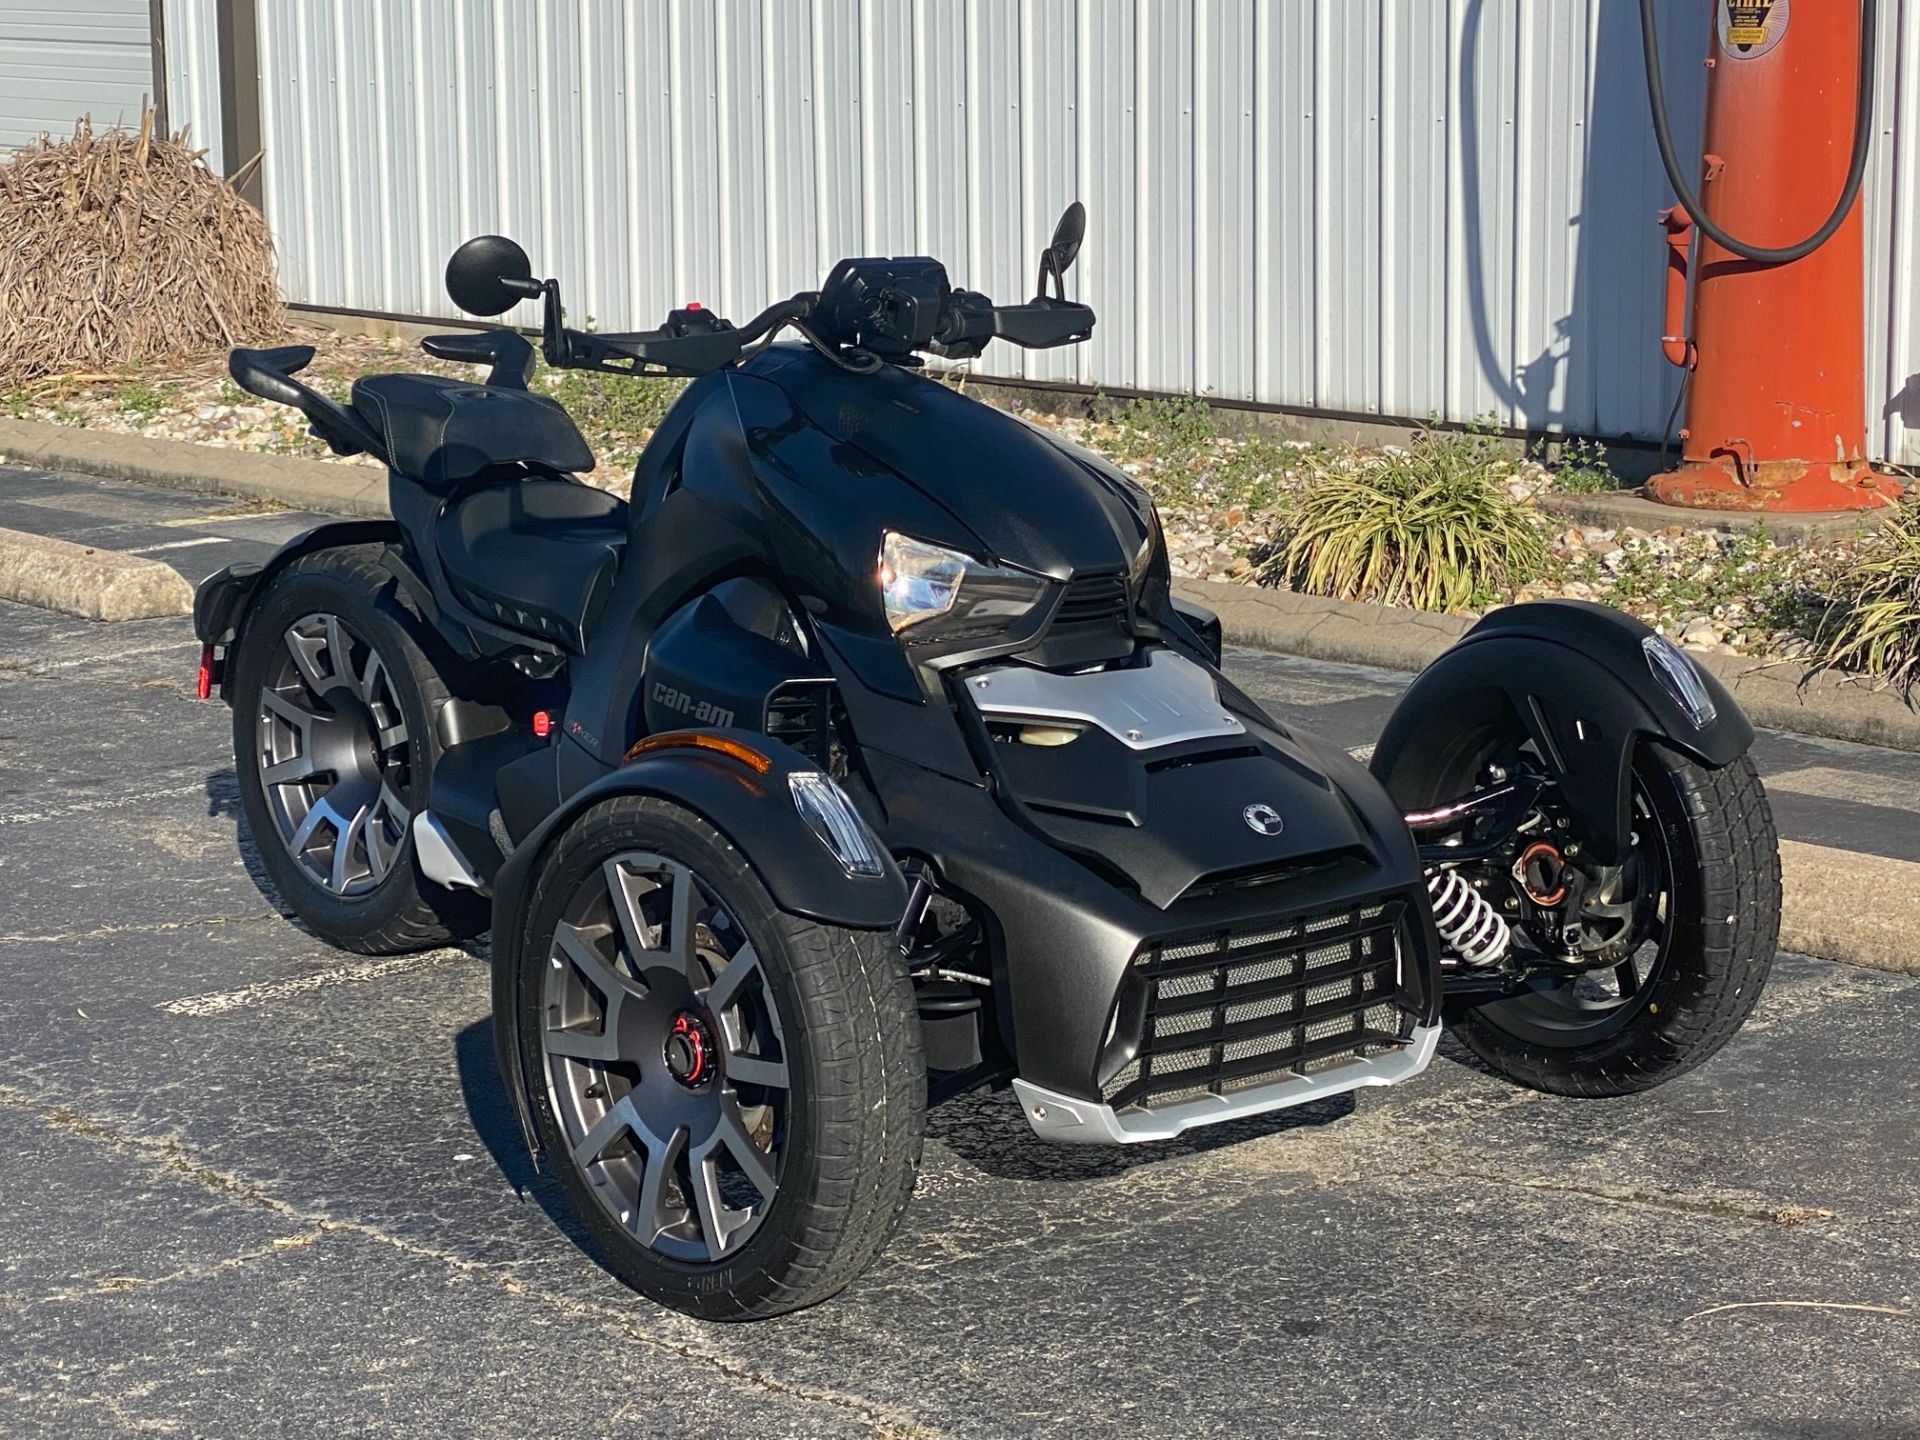 2019 Can-Am RYKER ACE RALLY EDITION in Greenbrier, Arkansas - Photo 2